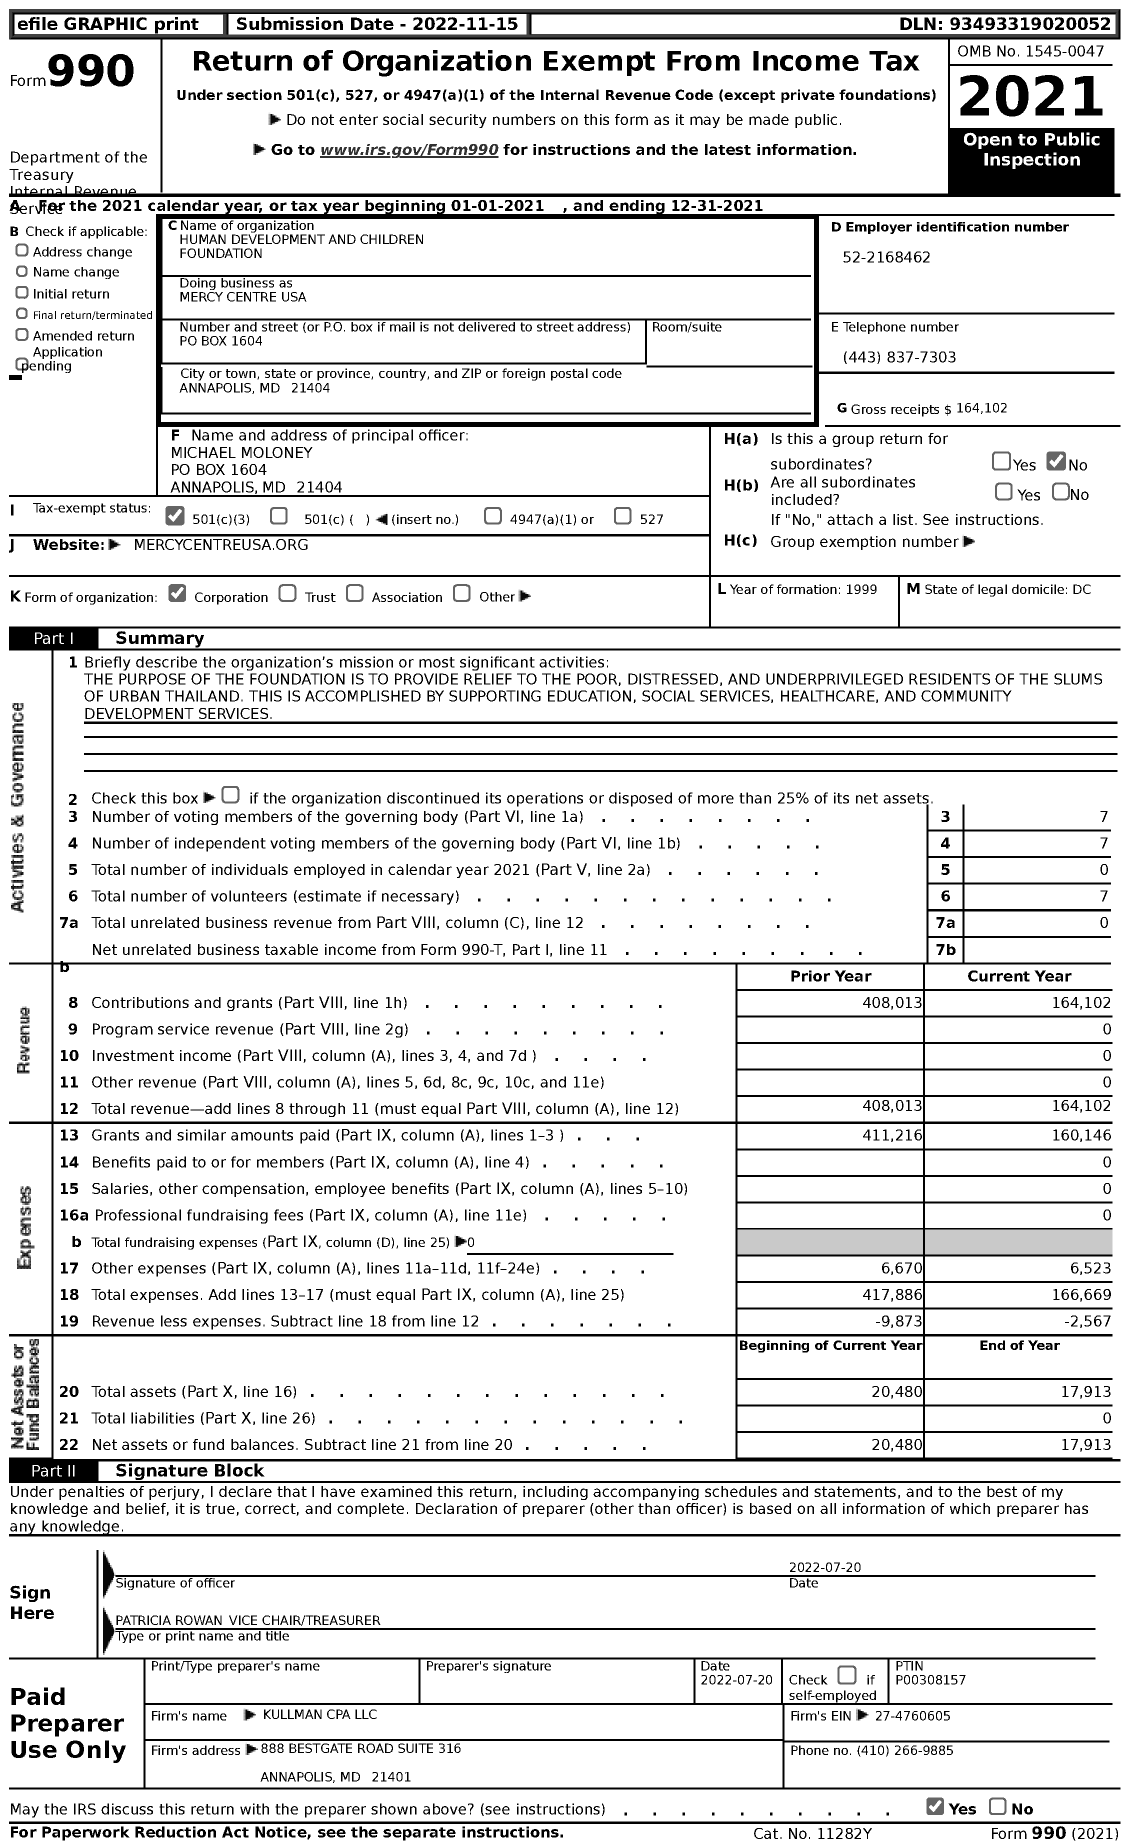 Image of first page of 2021 Form 990 for Mercy Centre USA